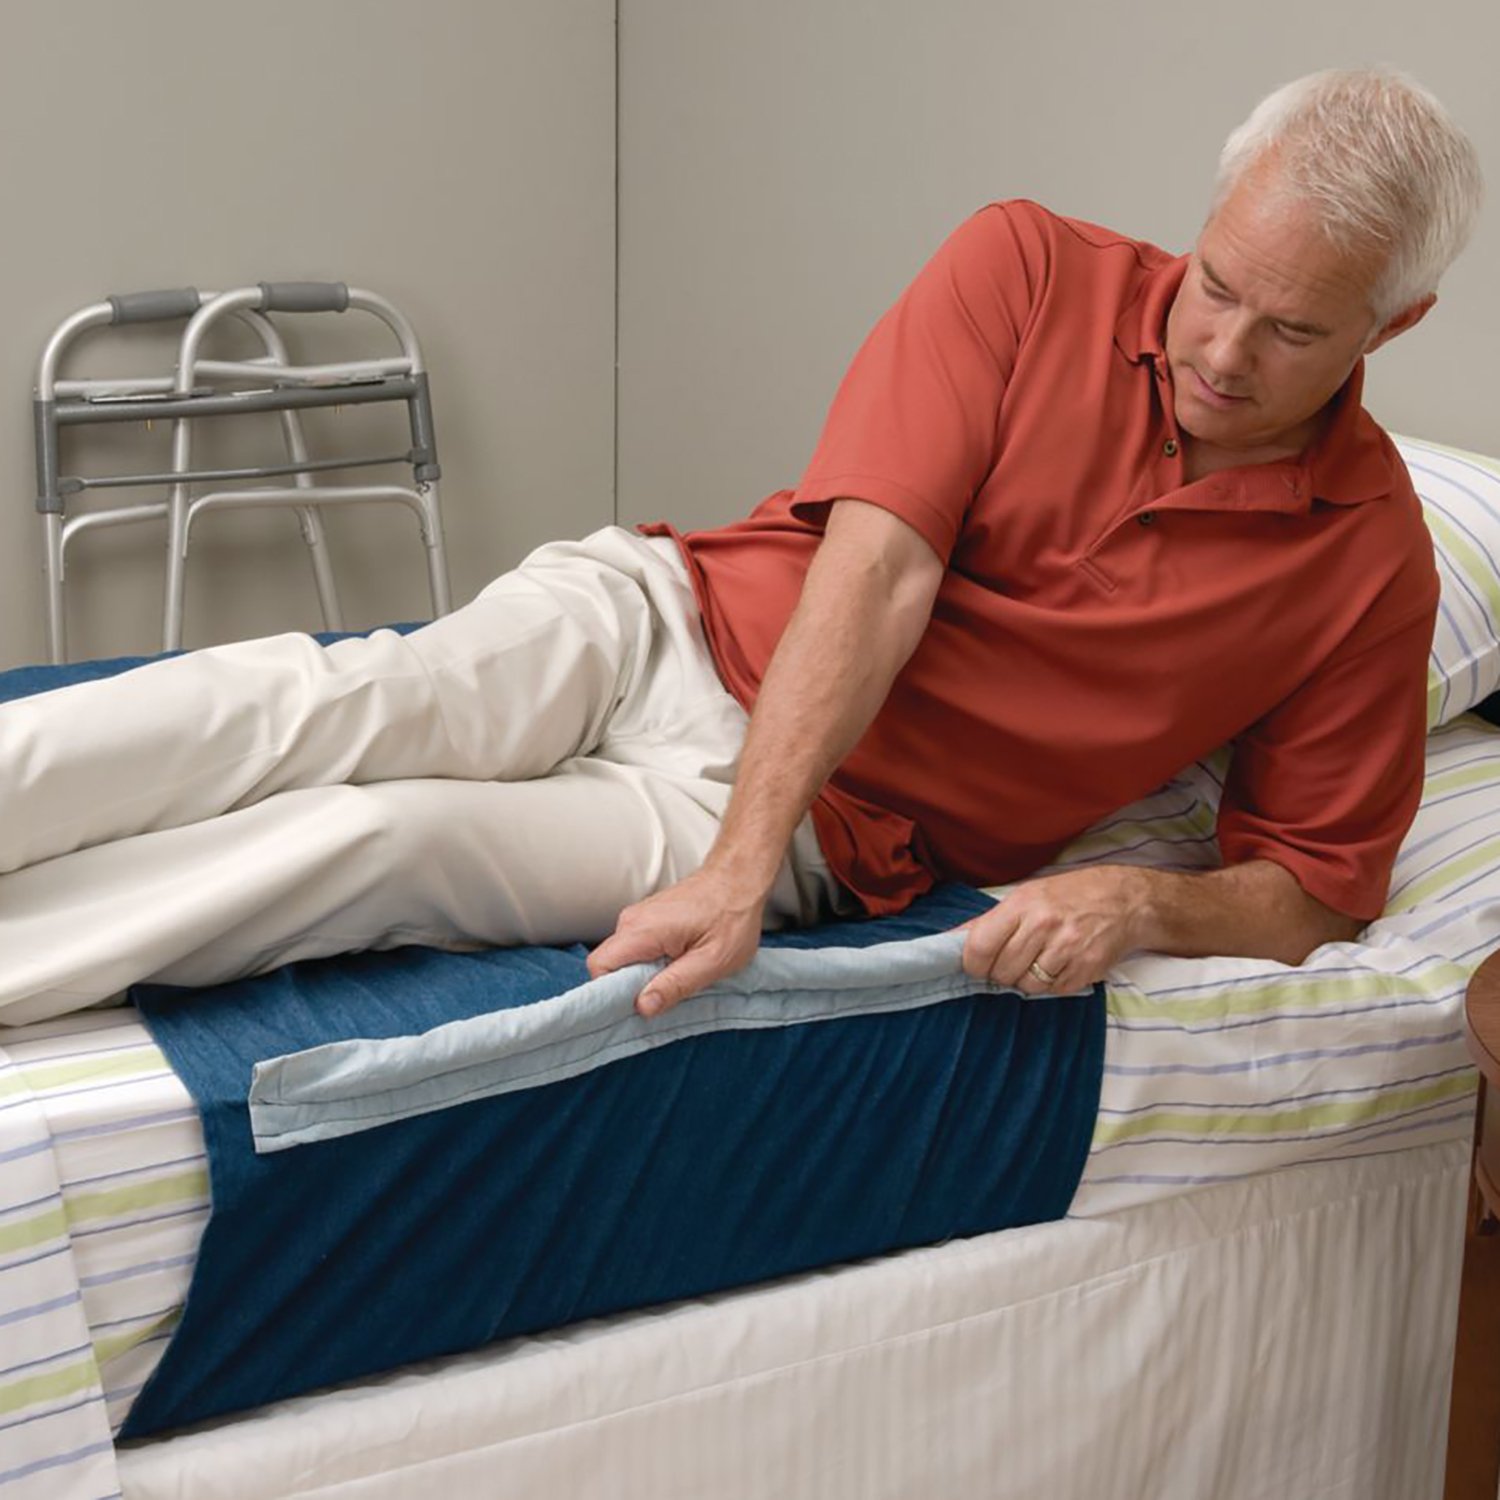 Sammons Preston Bed Assist Device, Transfer & Mobility Aid for Turning, Twisting & Repositioning, Patient Help Device for Hospitals, Clinics & Home, Nylon Rope Grip Handles for Independent Movement